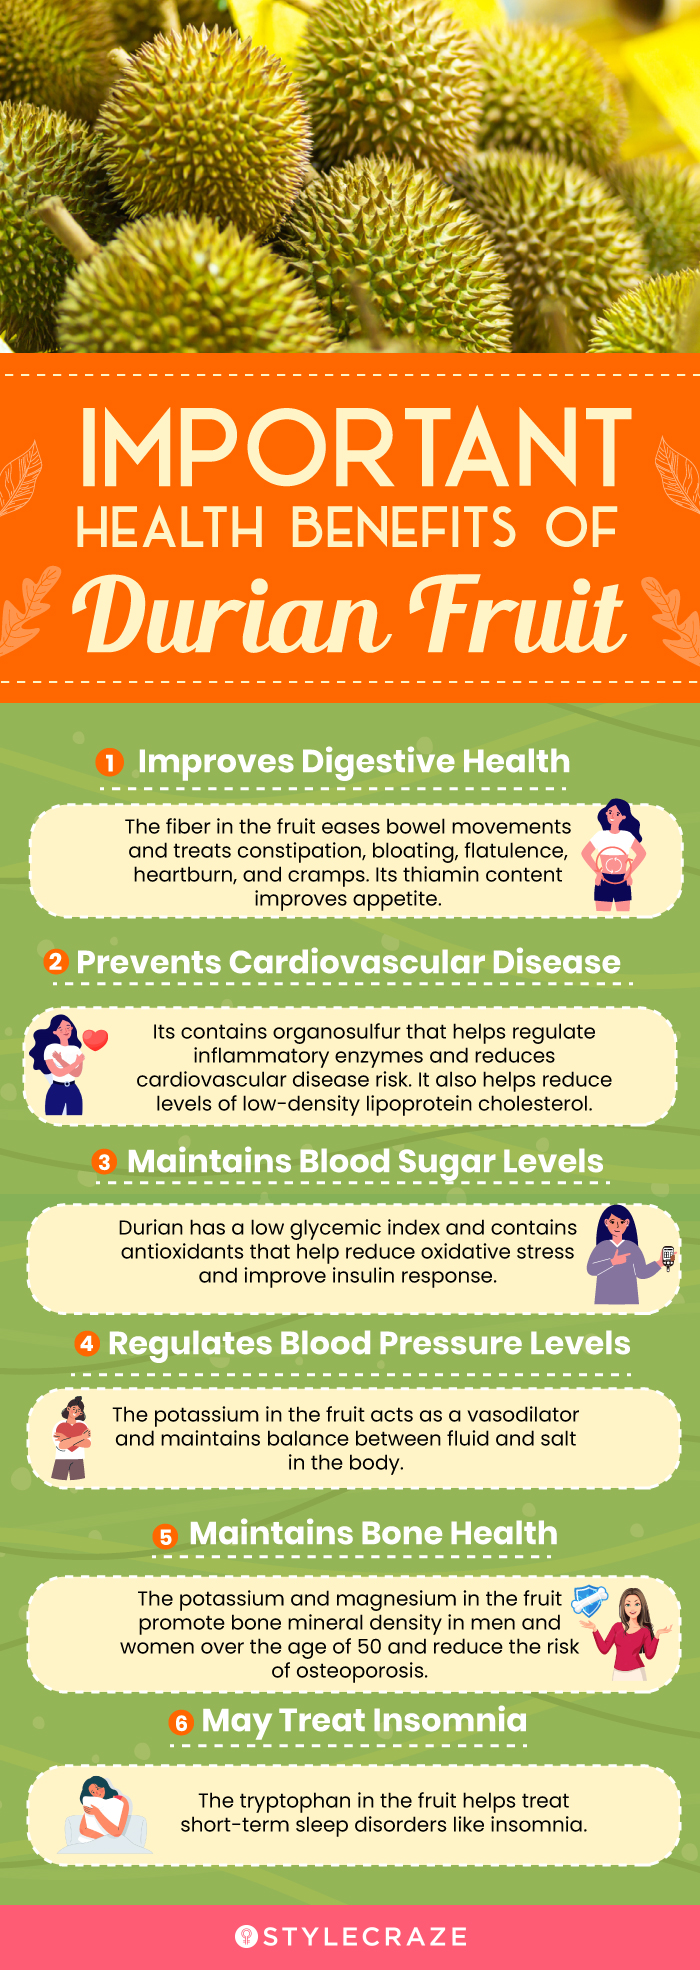 important health benefits of durian fruit (infographic)